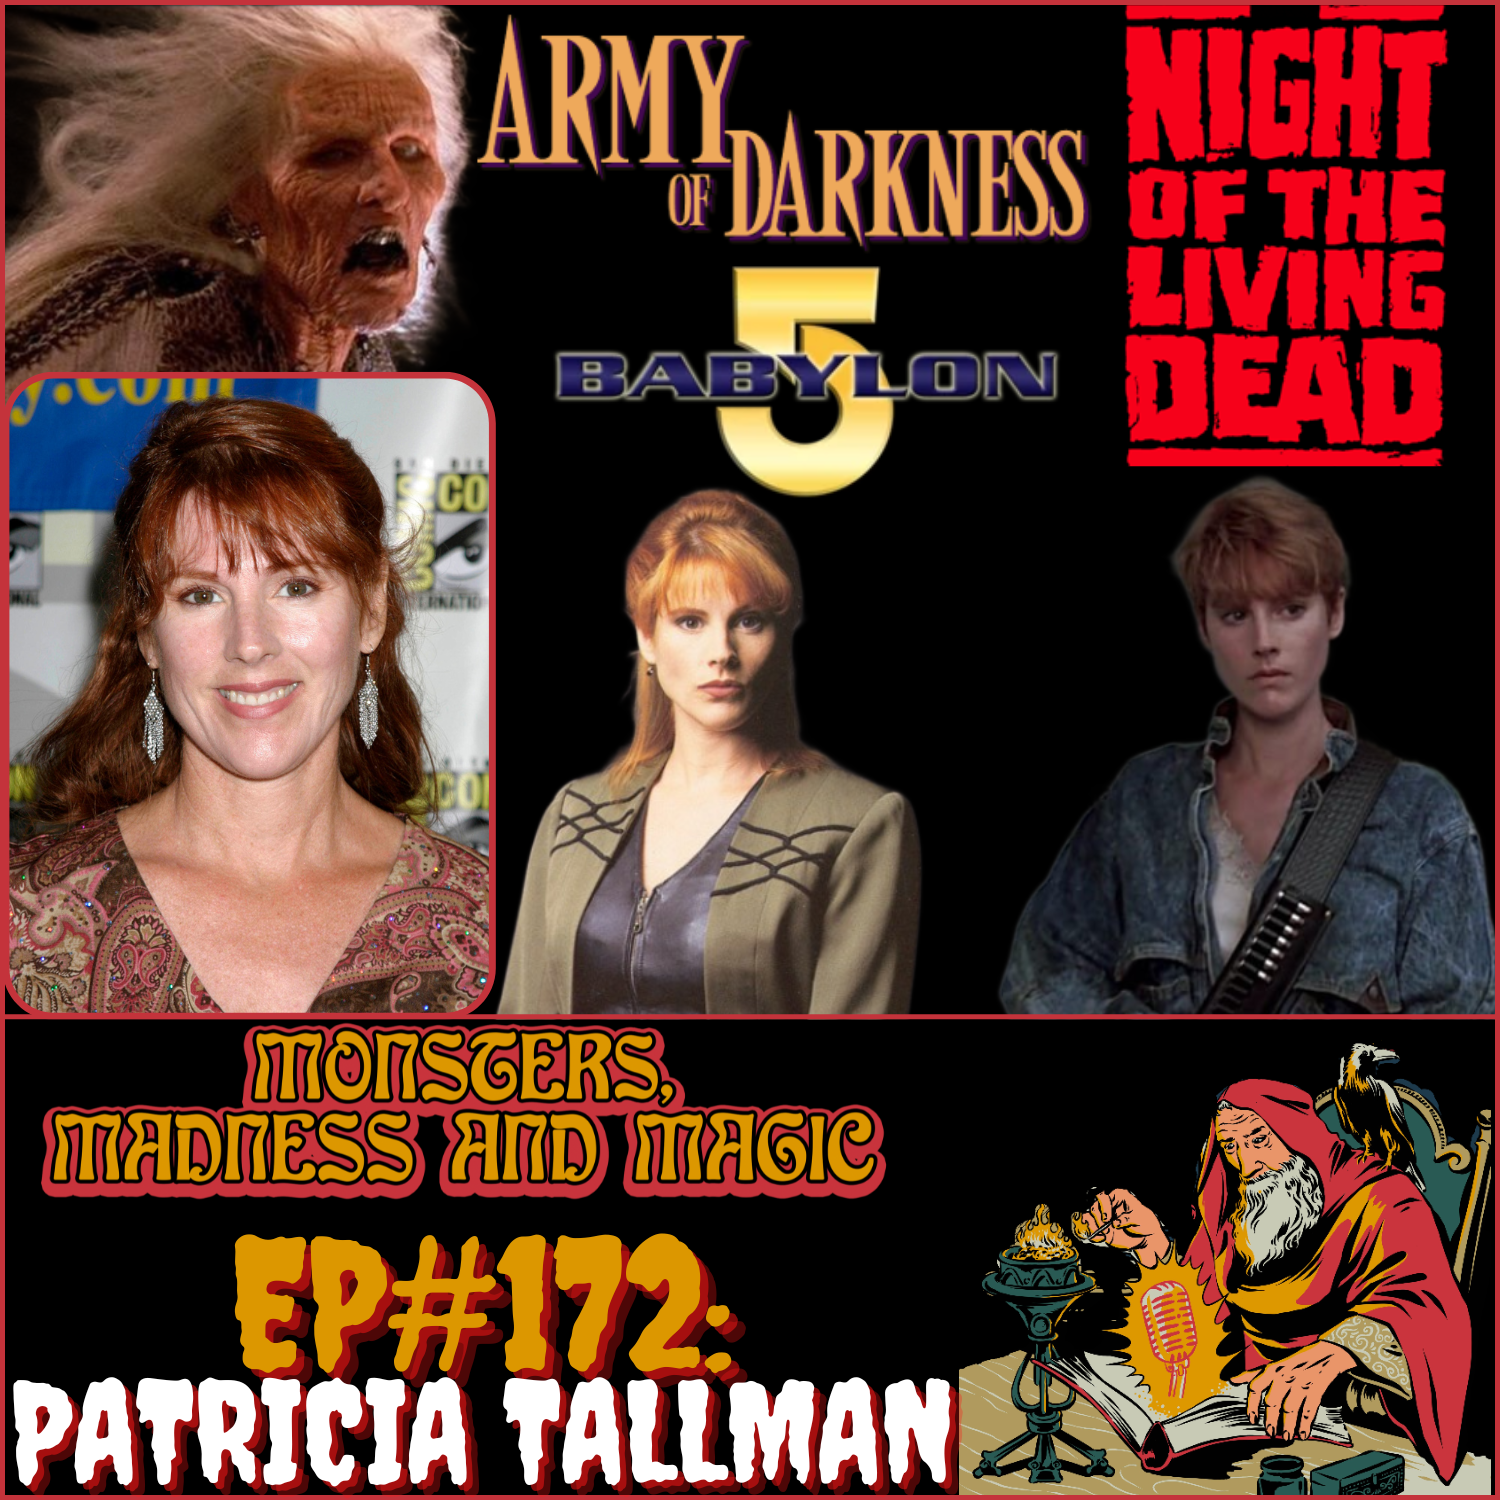 EP#172: Night of the Evil Dead - An Interview with Patricia Tallman